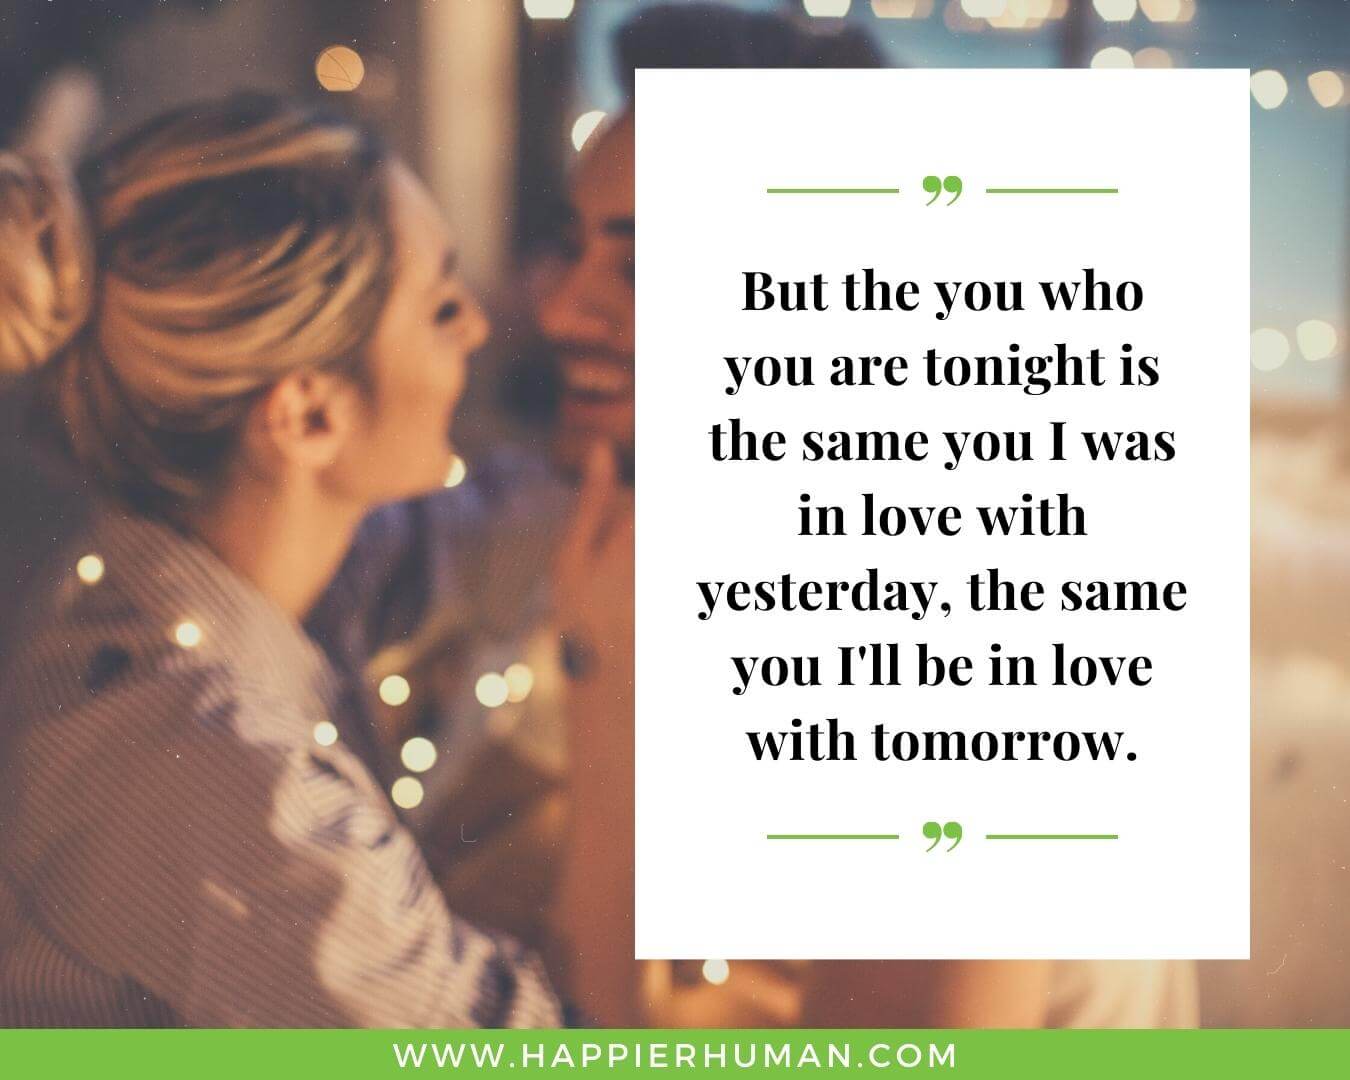 Unconditional Love Quotes for Her - “But the you who you are tonight is the same you I was in love with yesterday, the same you I'll be in love with tomorrow.”